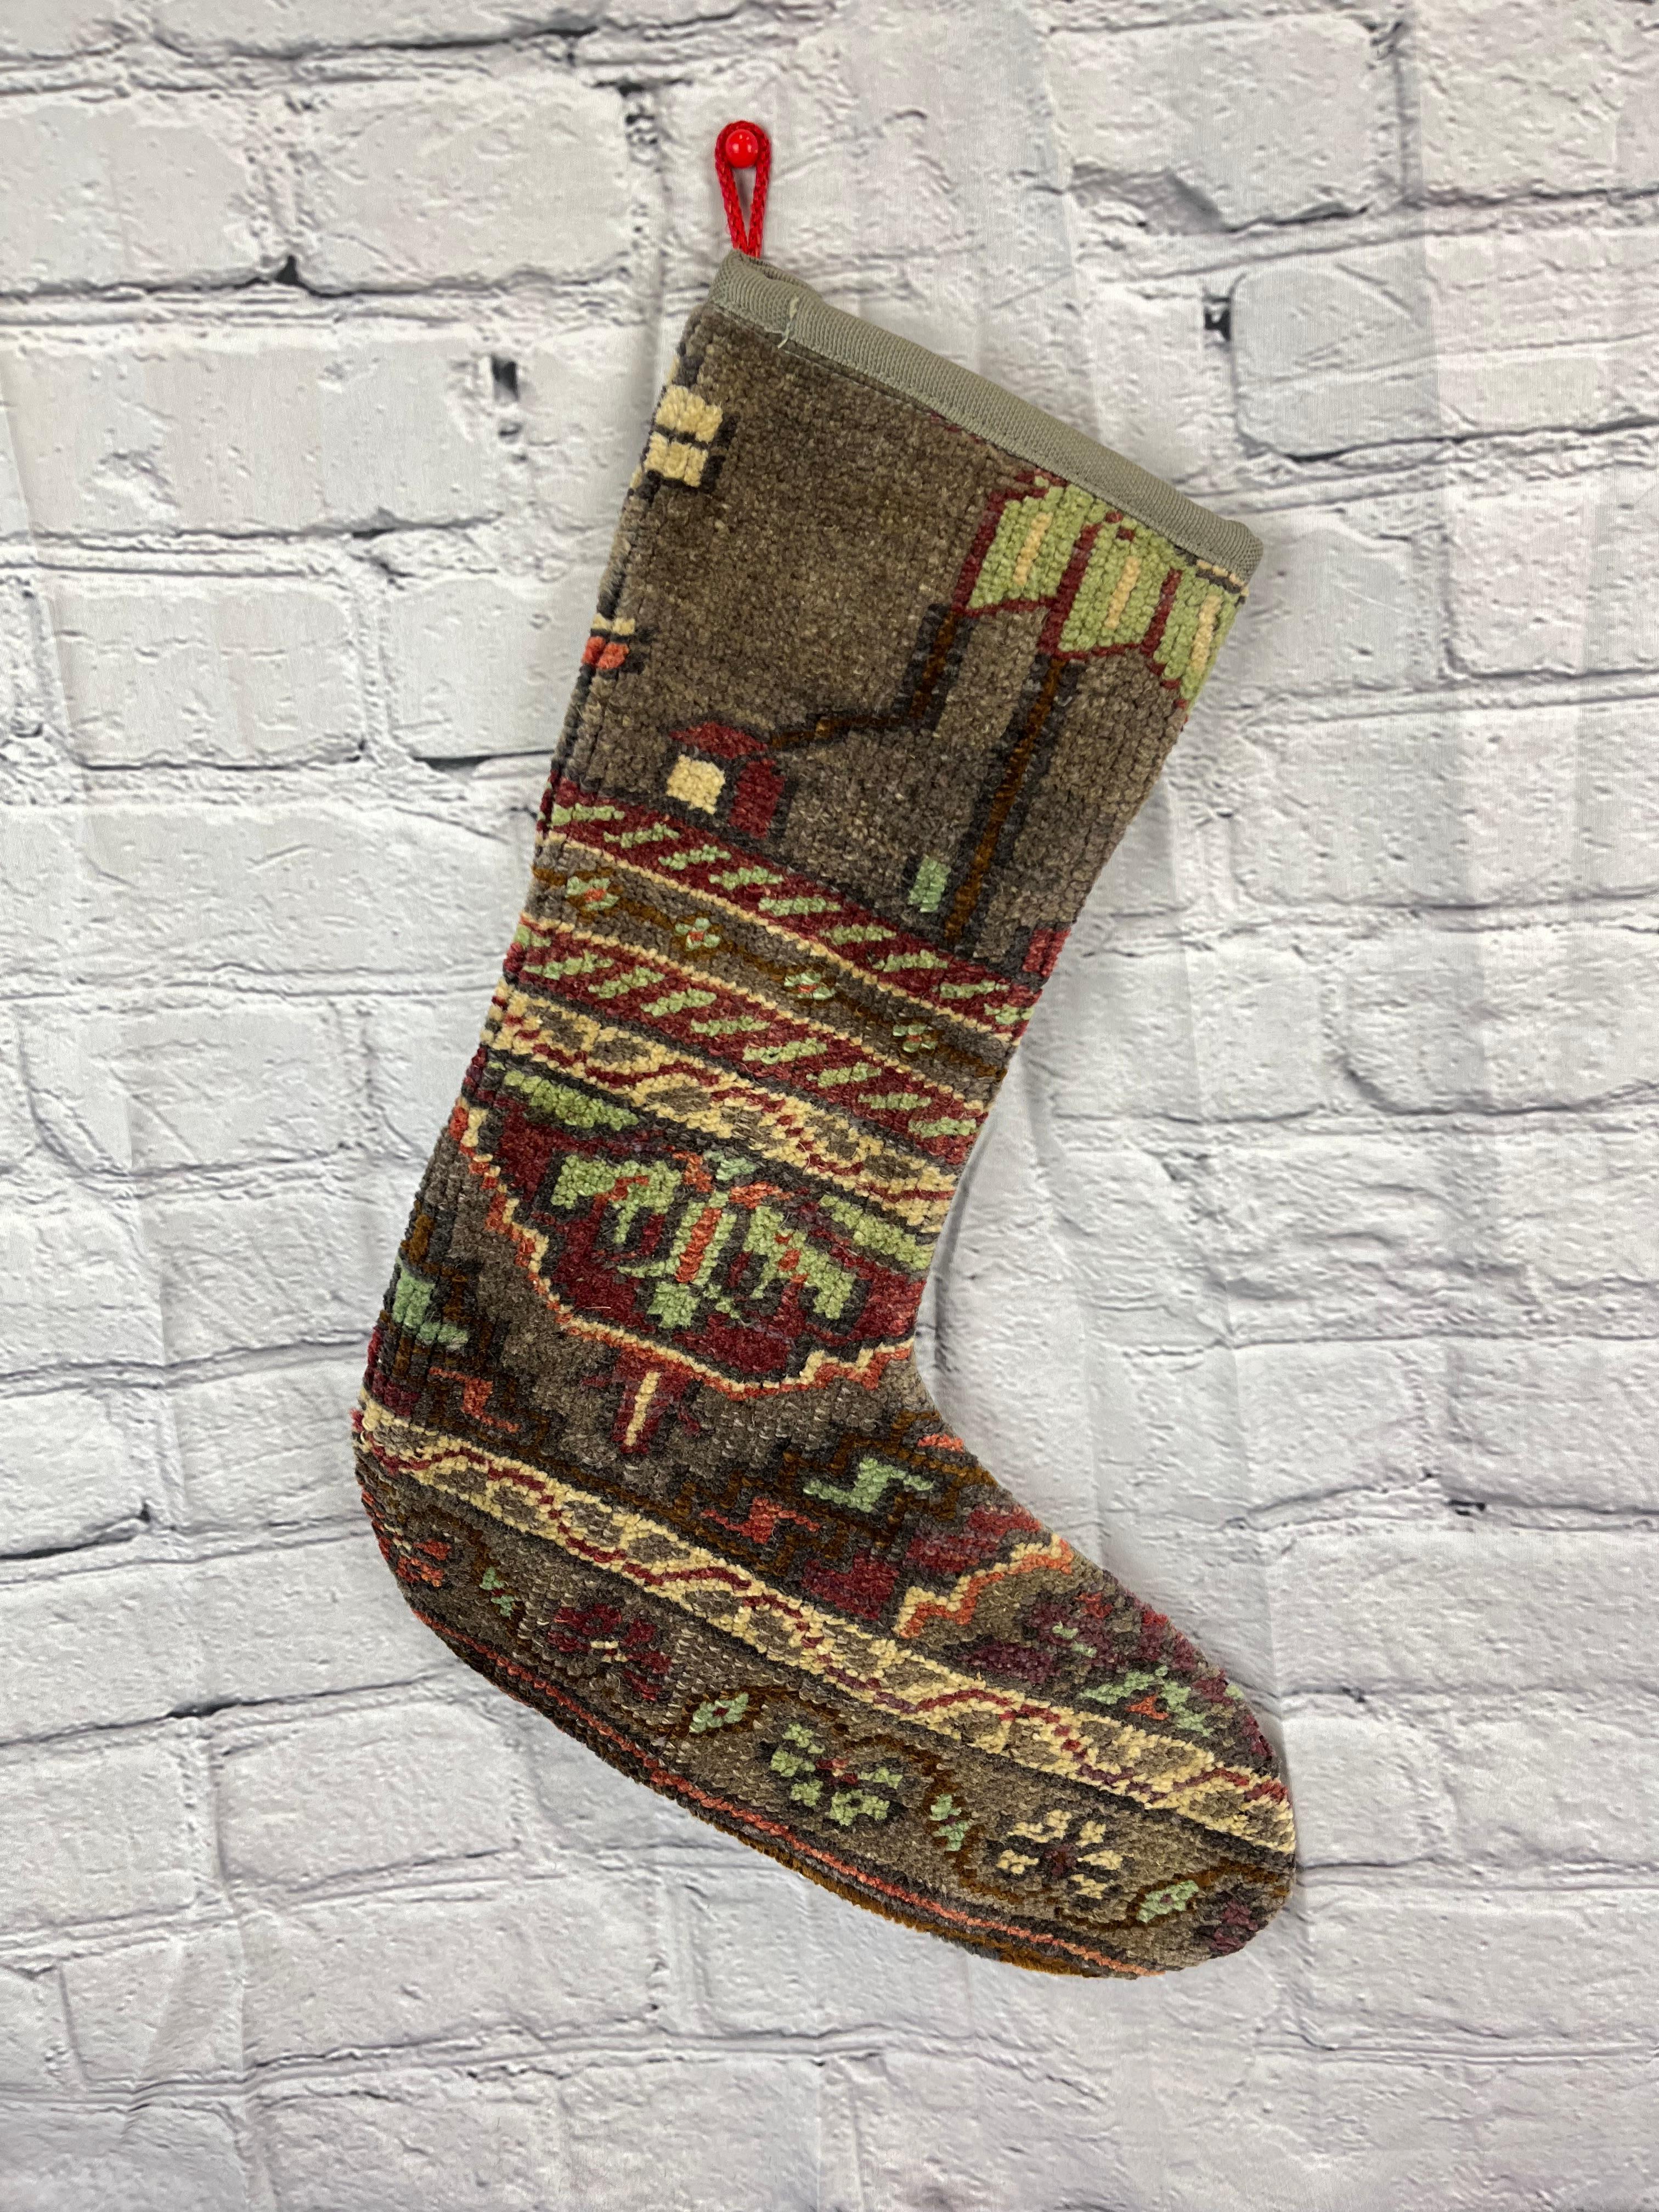 Handmade
Vintage from the 1960s
Materials: wool, cotton

Sustainable, upcycled Turkish rug Christmas stocking made from hand-woven rug fragments. 
Width: 13 inches
Height: 17 inches
Christmas Stocking
Turkish Rug Stocking
Handmade Stocking
Vintage